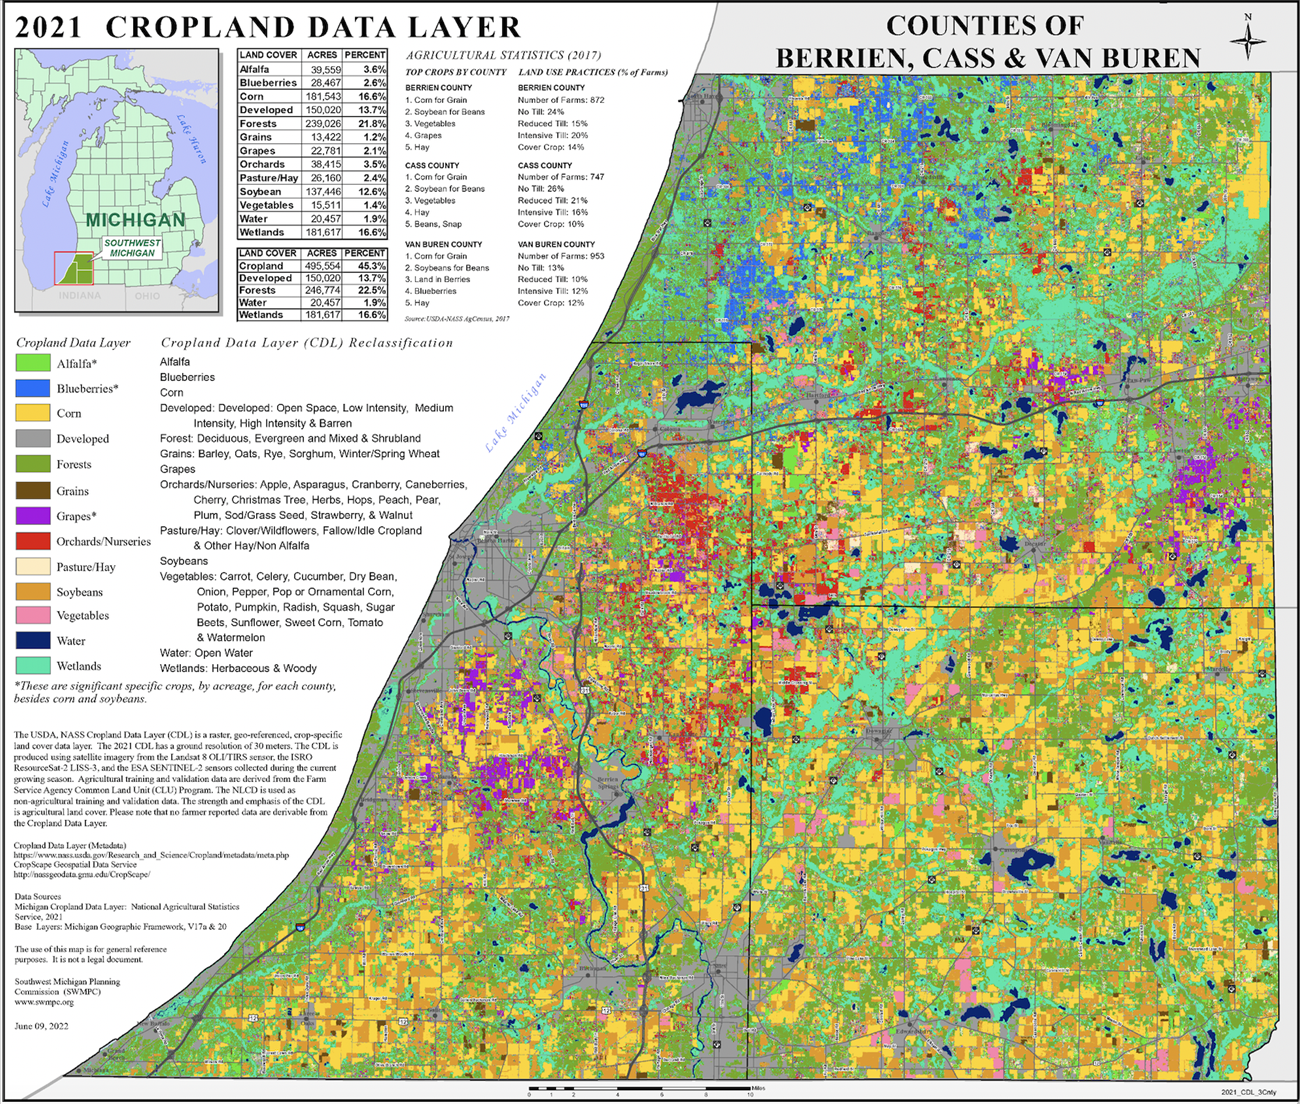 2021 Tri-County Cropland Map and Data